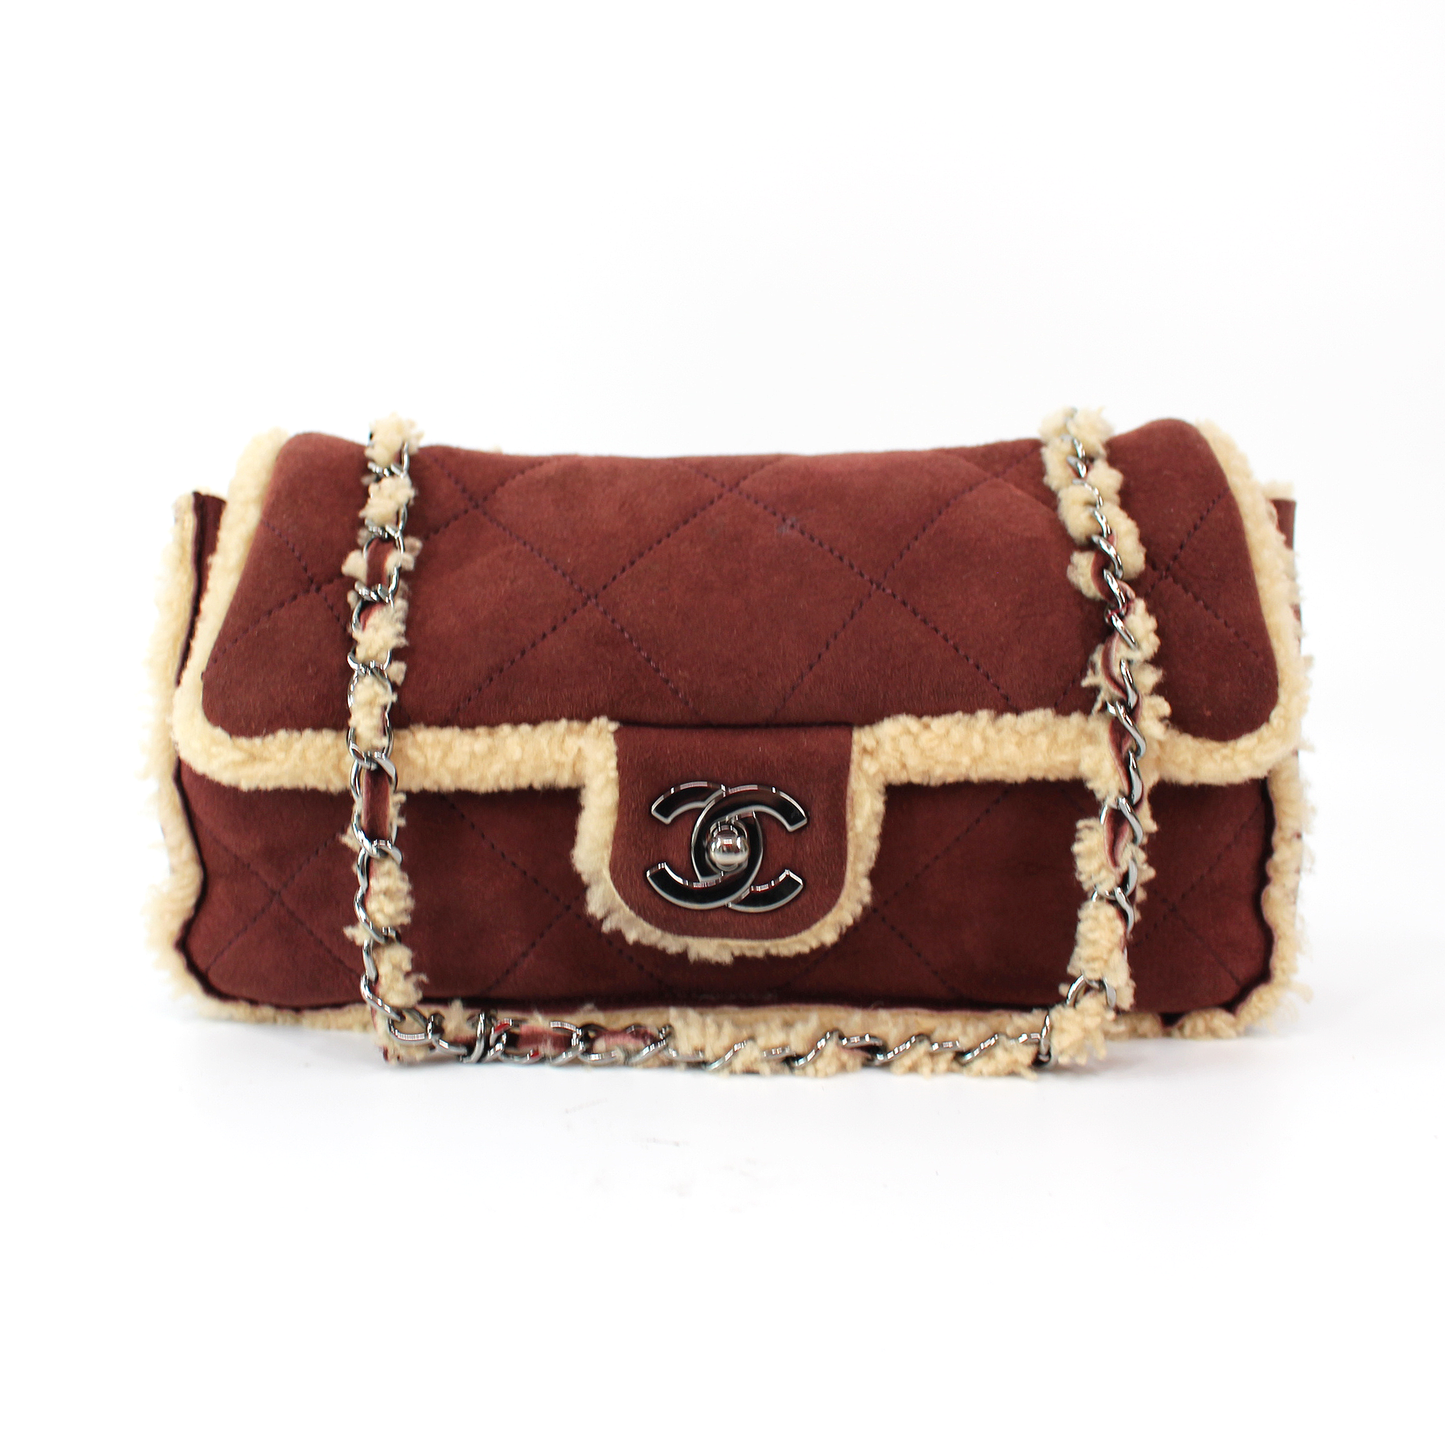 CHANEL CC TURNLOCK BROWN SUEDE LEATHER RED SHEARLING FLAP CLUTCH